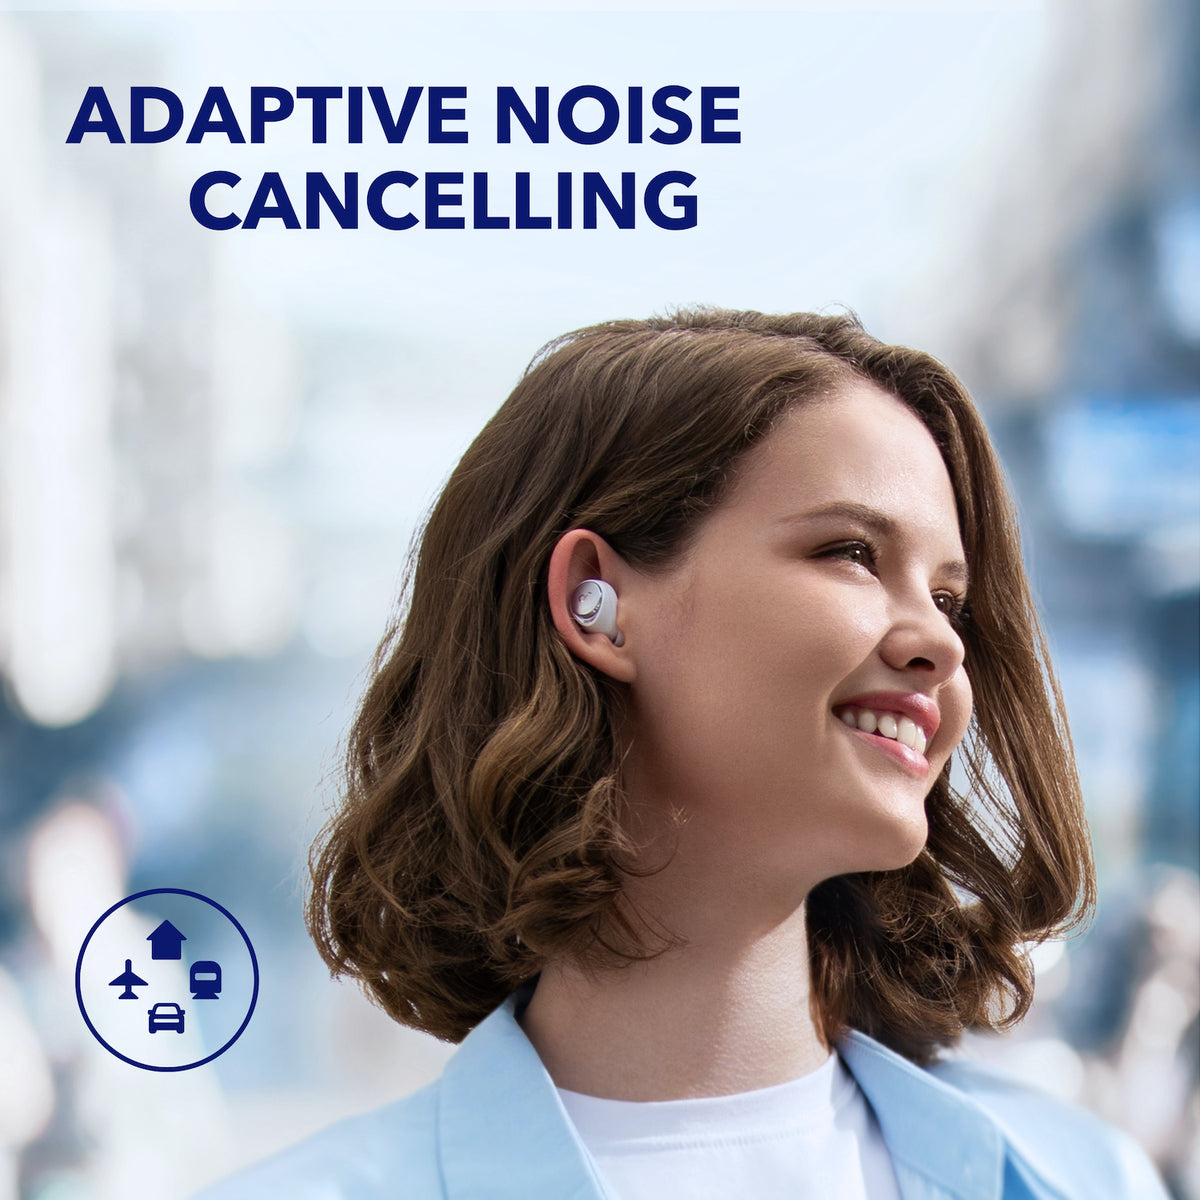 Buy Space A40 All-New Noise Cancelling Earbuds - soundcore EU - soundcore  Europe